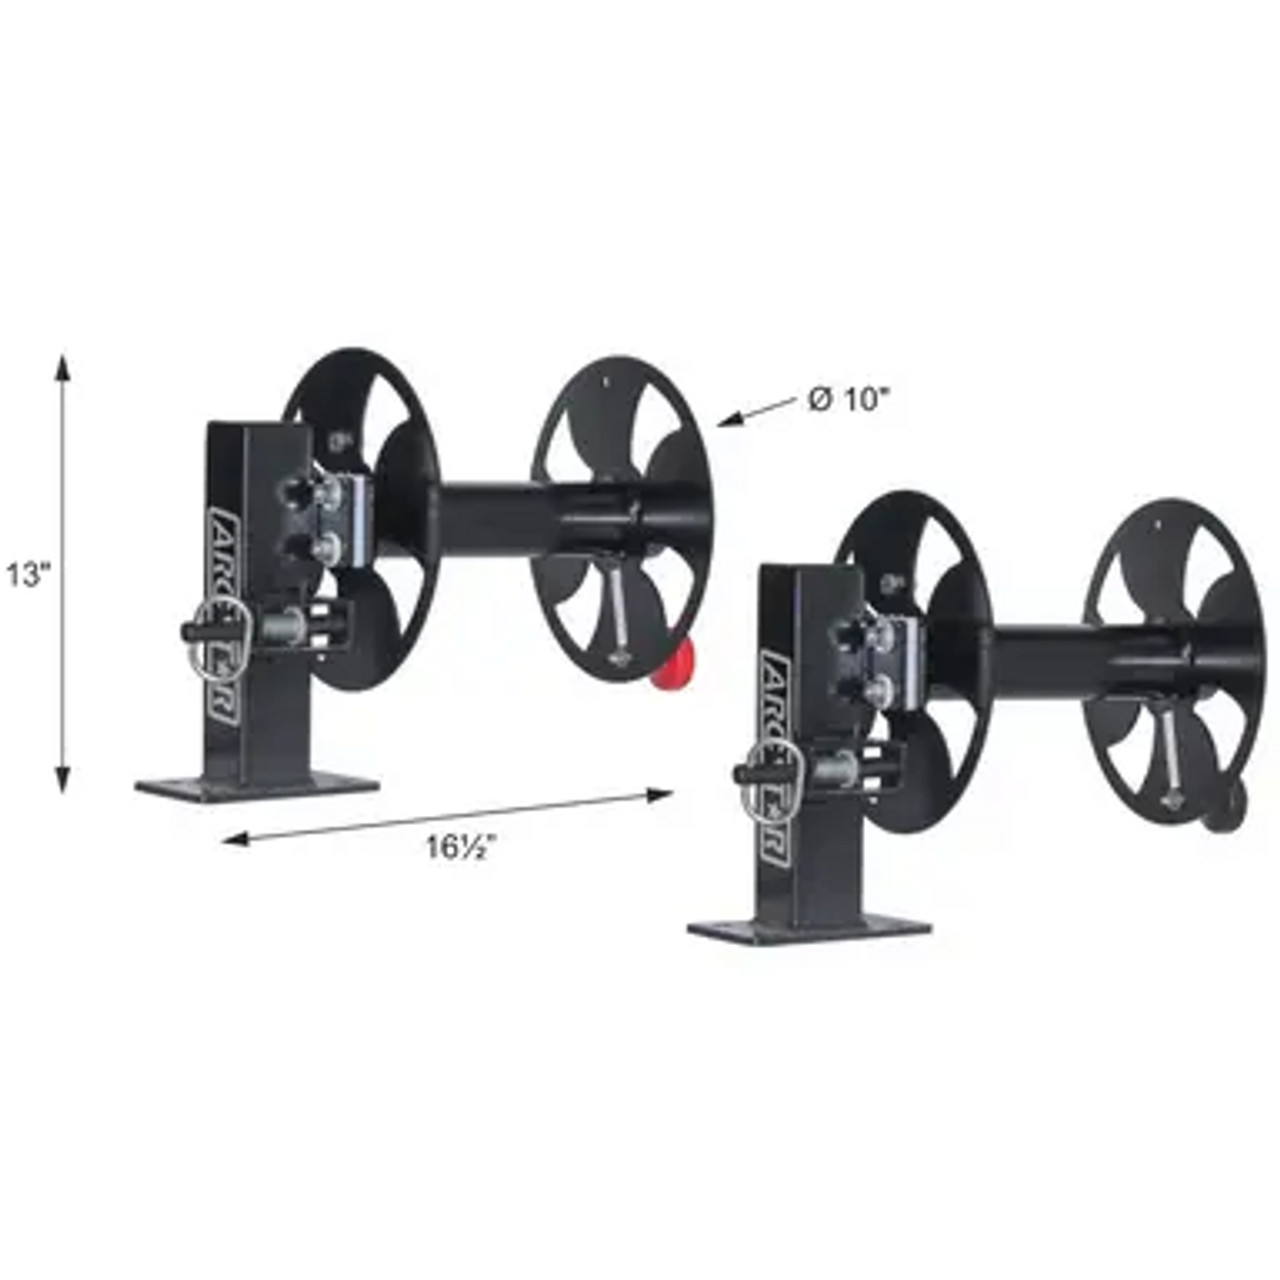 Revolution 10" Cable reels, 1 set of 2 Reels with Fixed Base